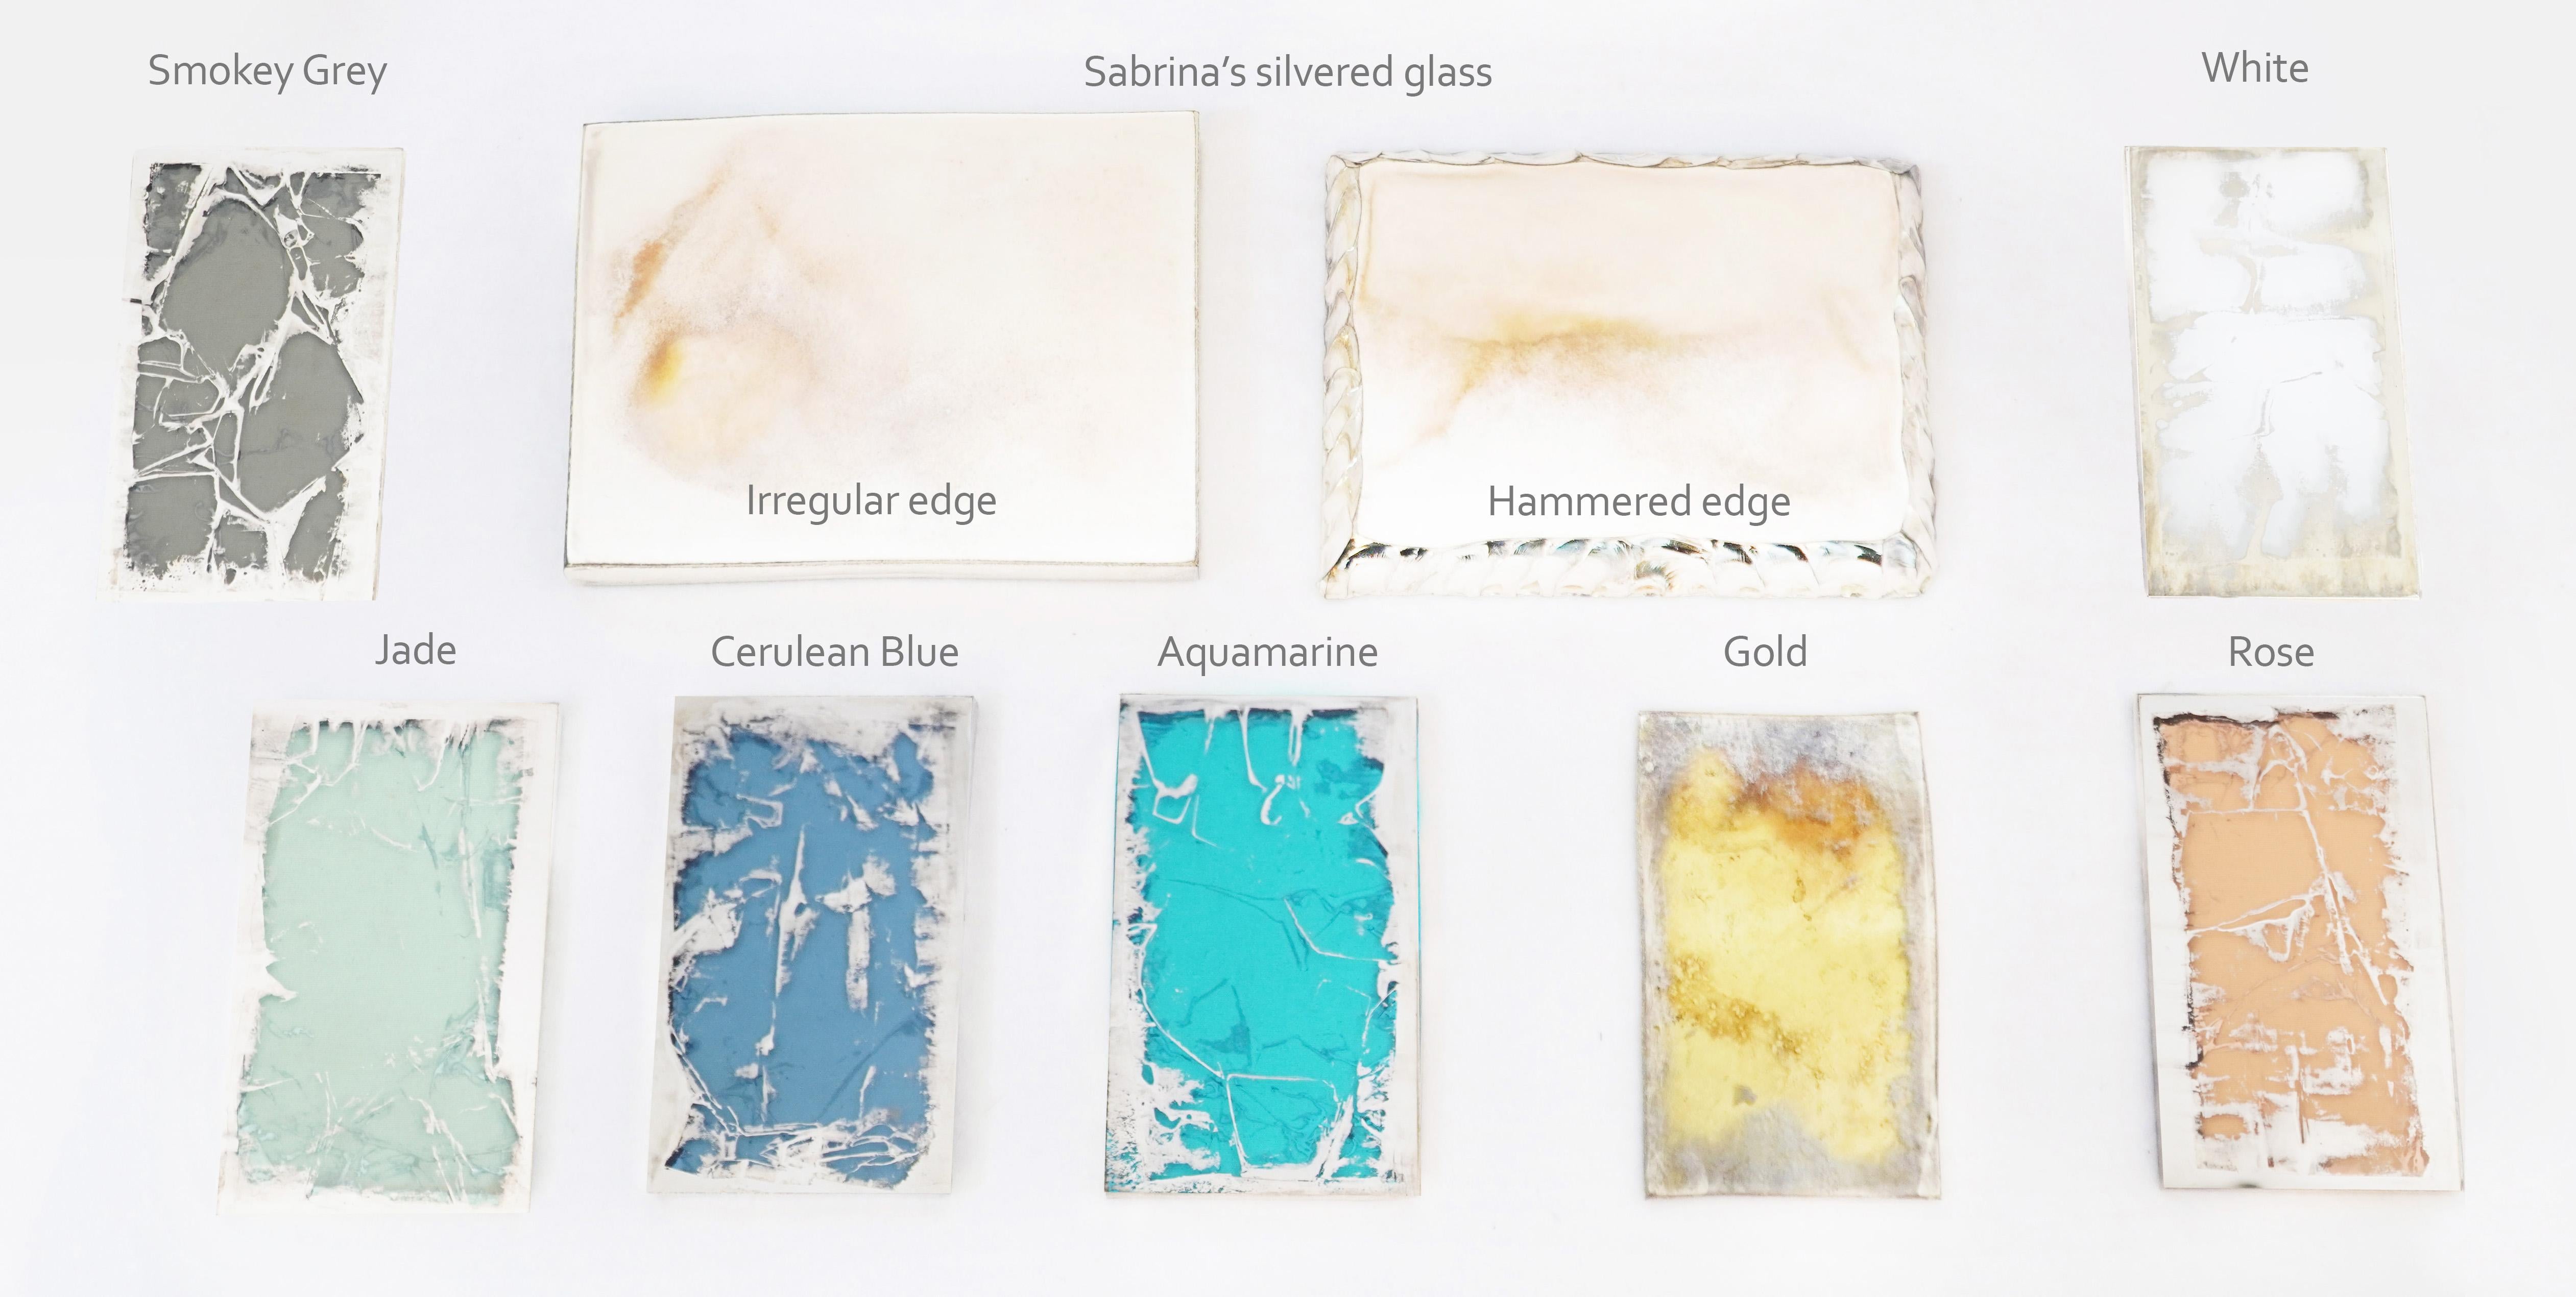 A variety of precious Sabrina Landini's silvered glass samples.
Require your colors, three pieces in total will be provided.
Make your selection request.

If all colors, available in Sabrina Landini collection, are required, we kindly invite you to